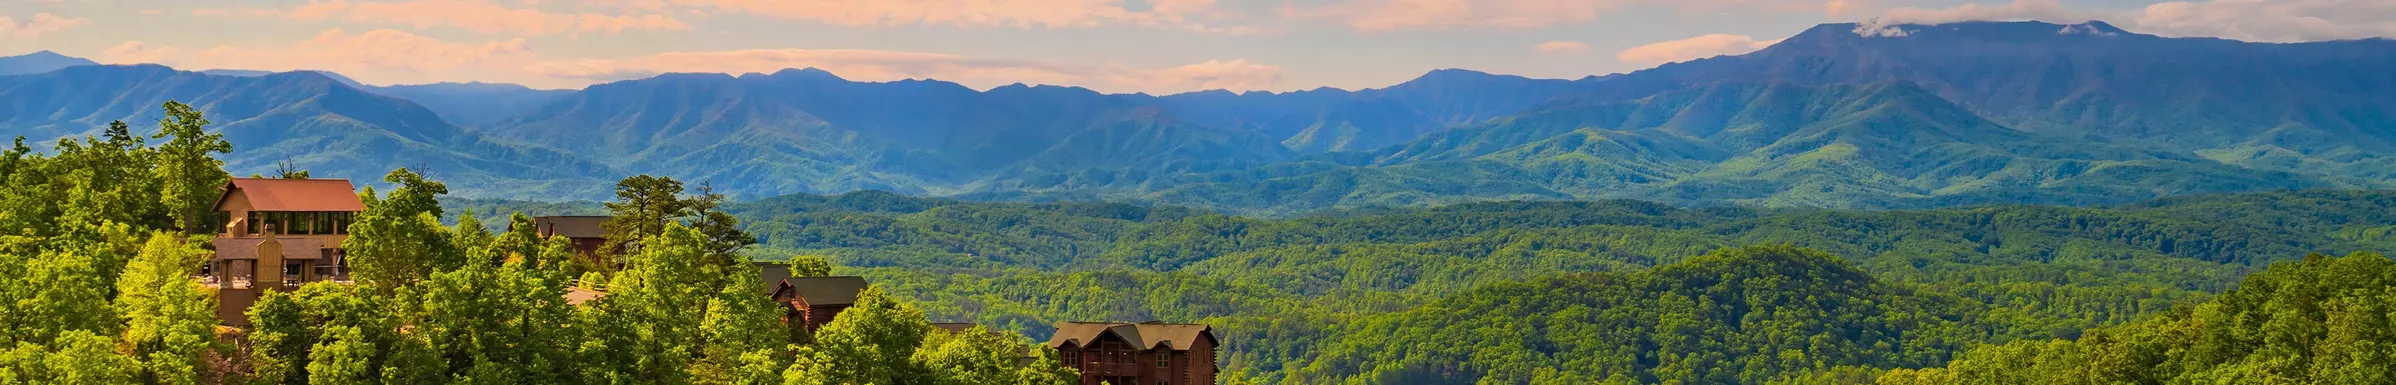 view of the Smokies at sunset